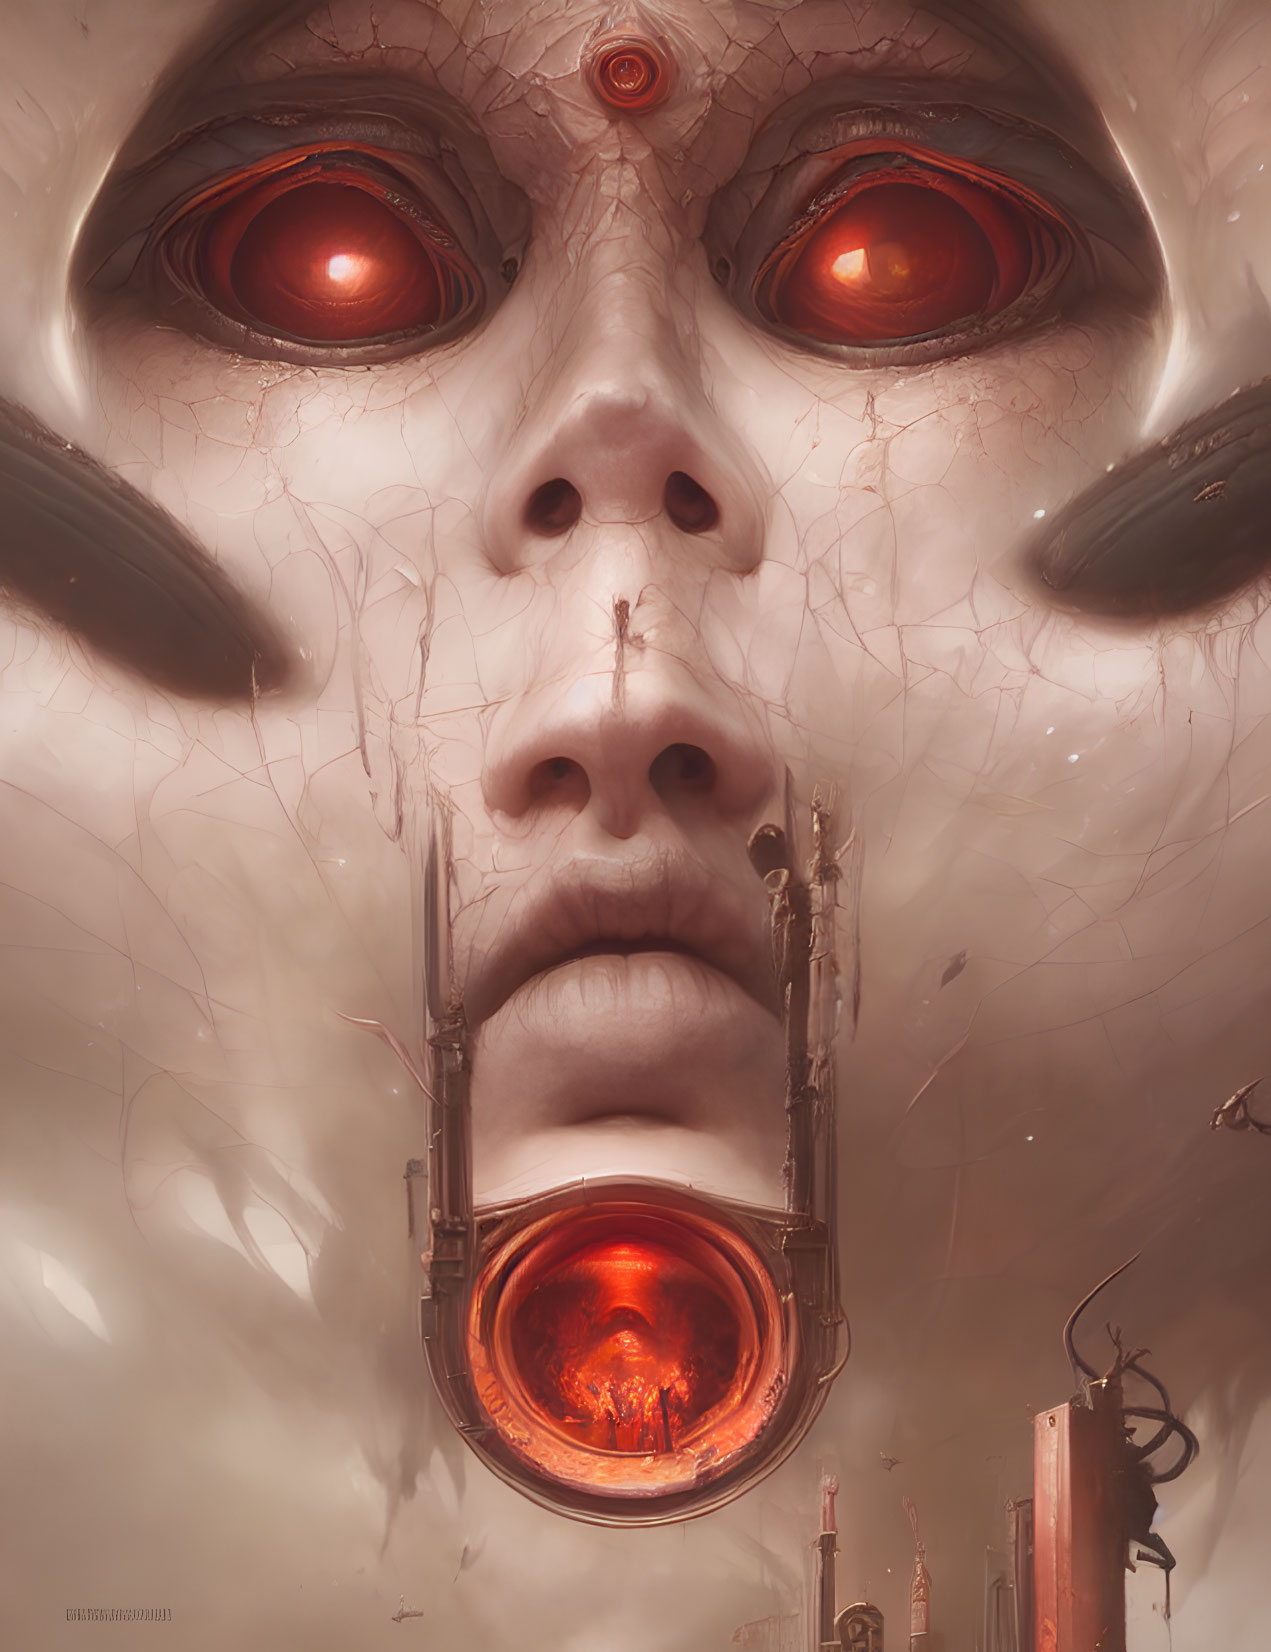 Surreal illustration of face with oversized red eyes and circular mouth aperture in dystopian city setting